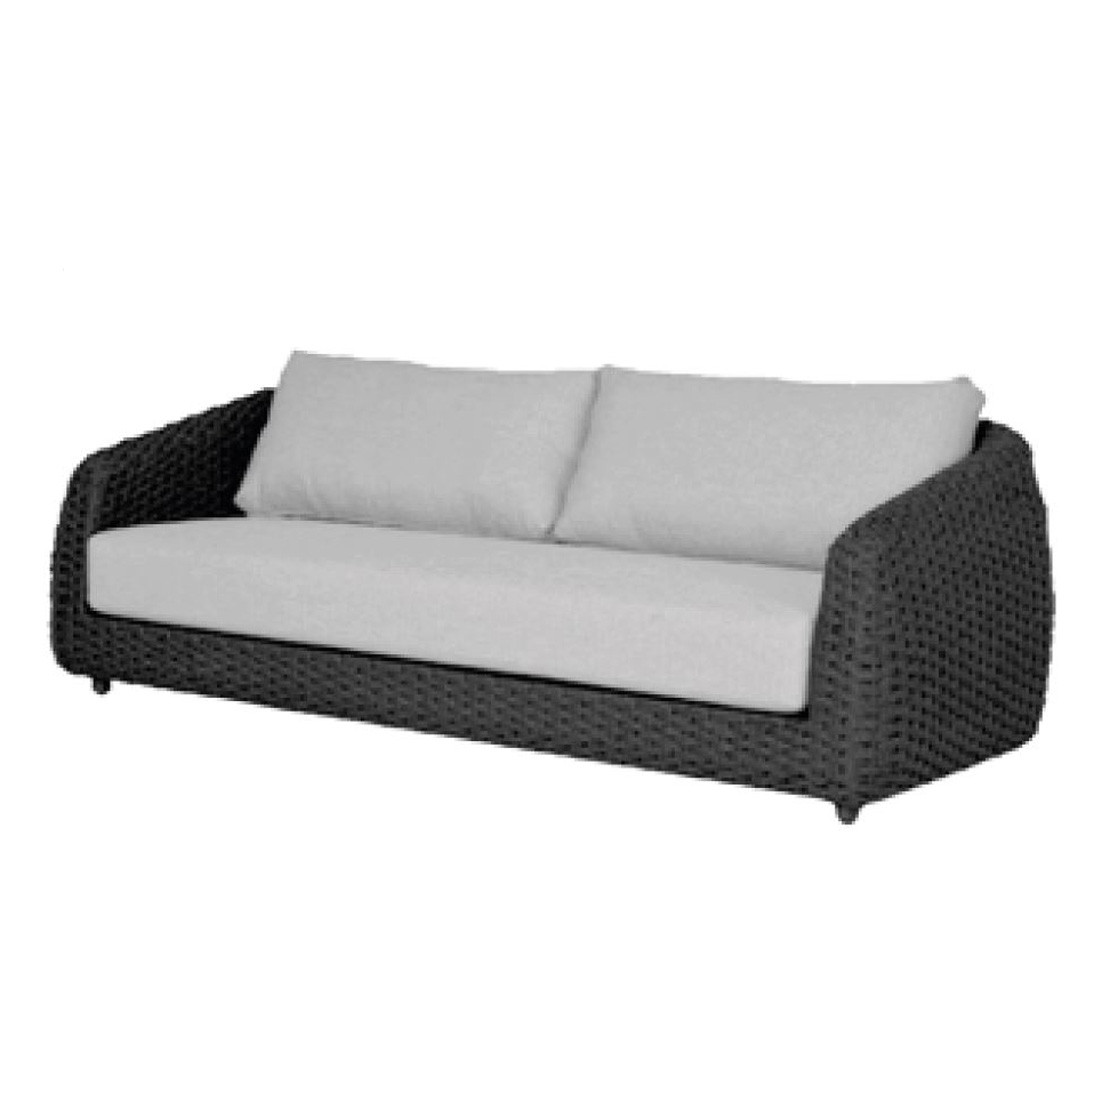 Saint-Tropez living bench 3 seater anthracite with 3 cushions